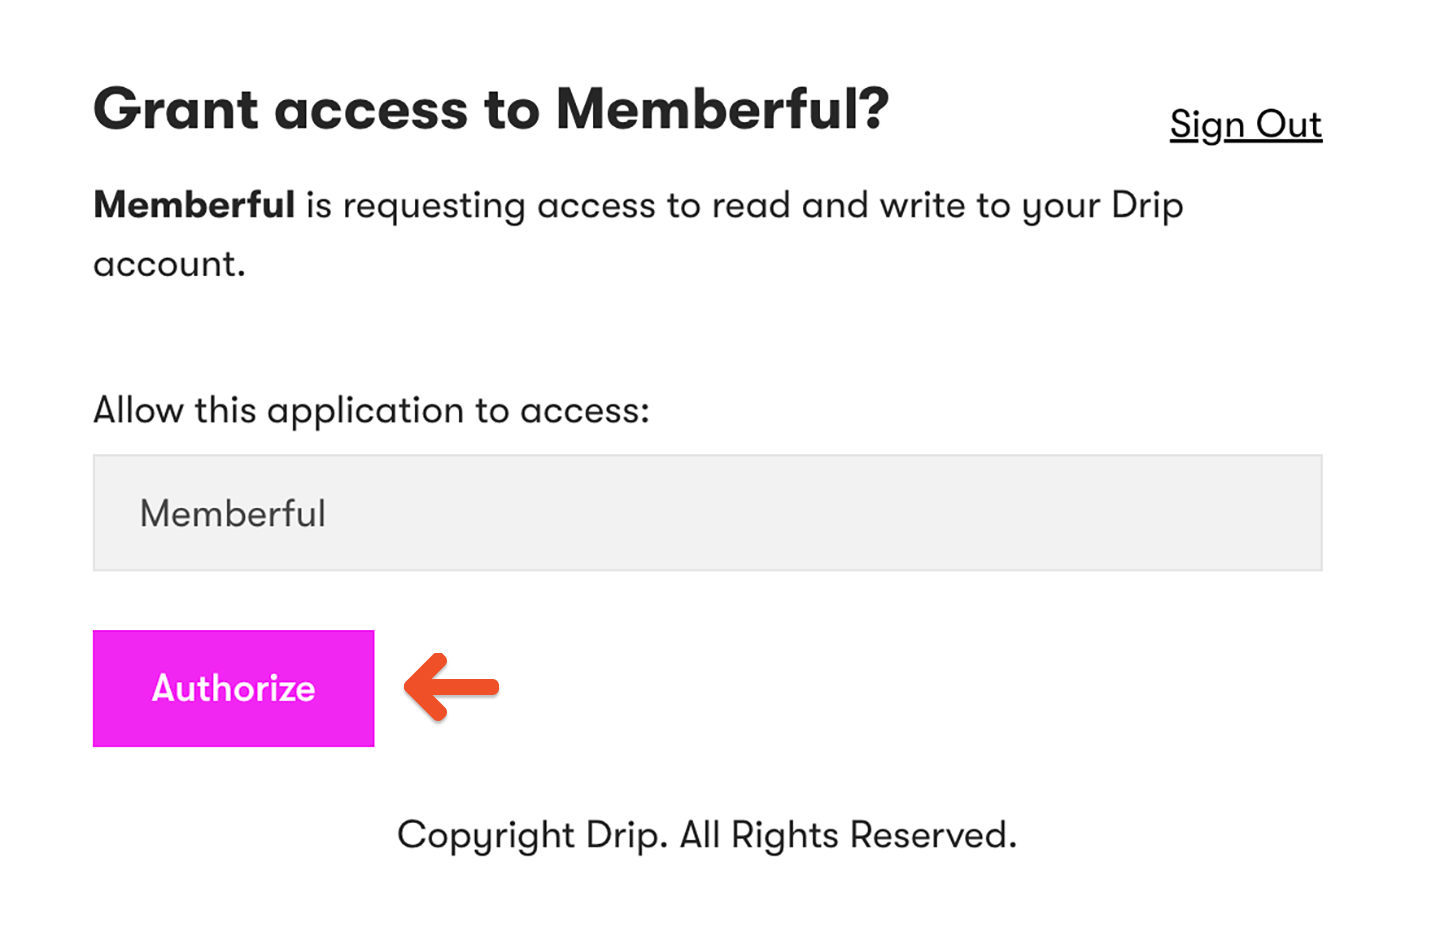 Grant access to Memberful